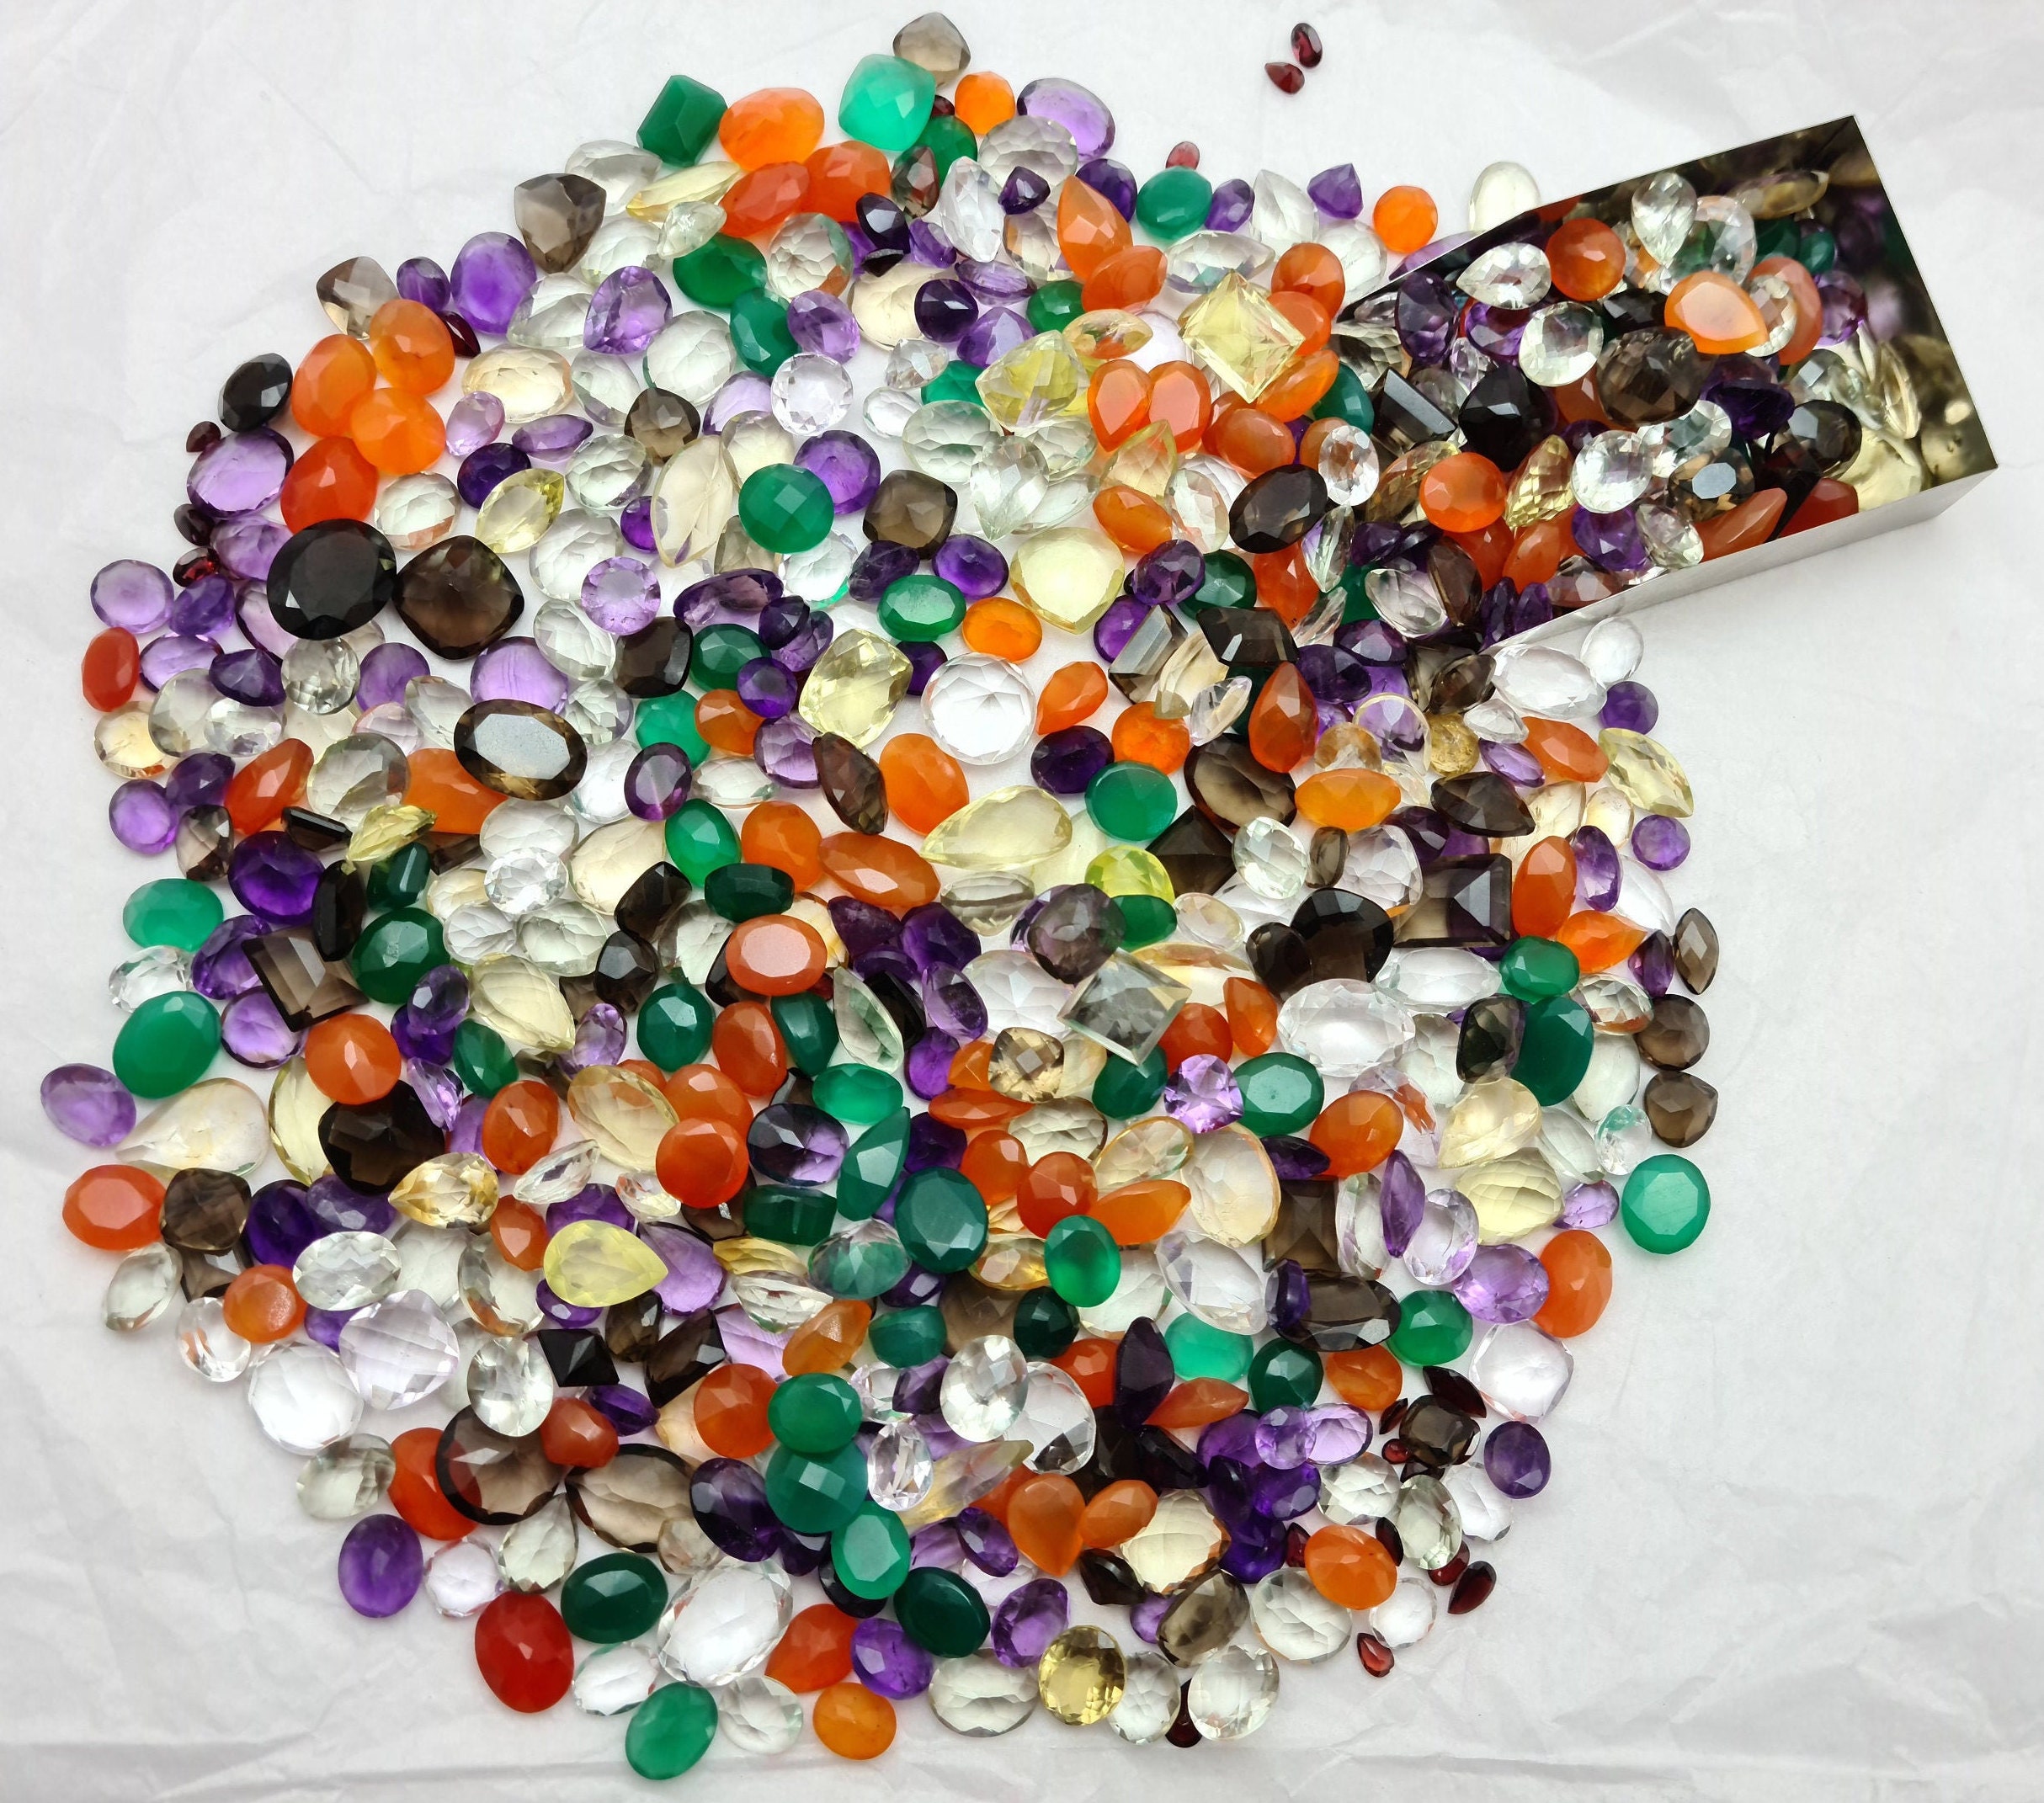 Over 5000 Carats Mixed Loose Gemstones, Multi Color Stones Faceted